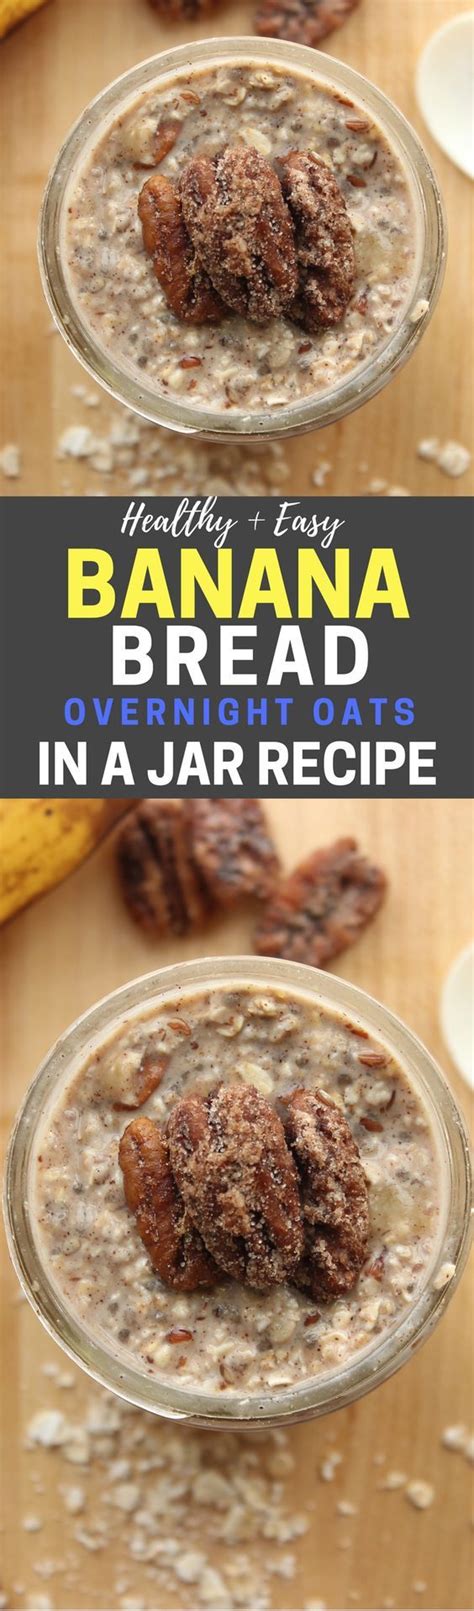 High in fibre and low in fat, this simple version of overnight oats packs a delicious and nutritious punch. Healthy and Easy Banana Bread Overnight Oats In A Jar ...